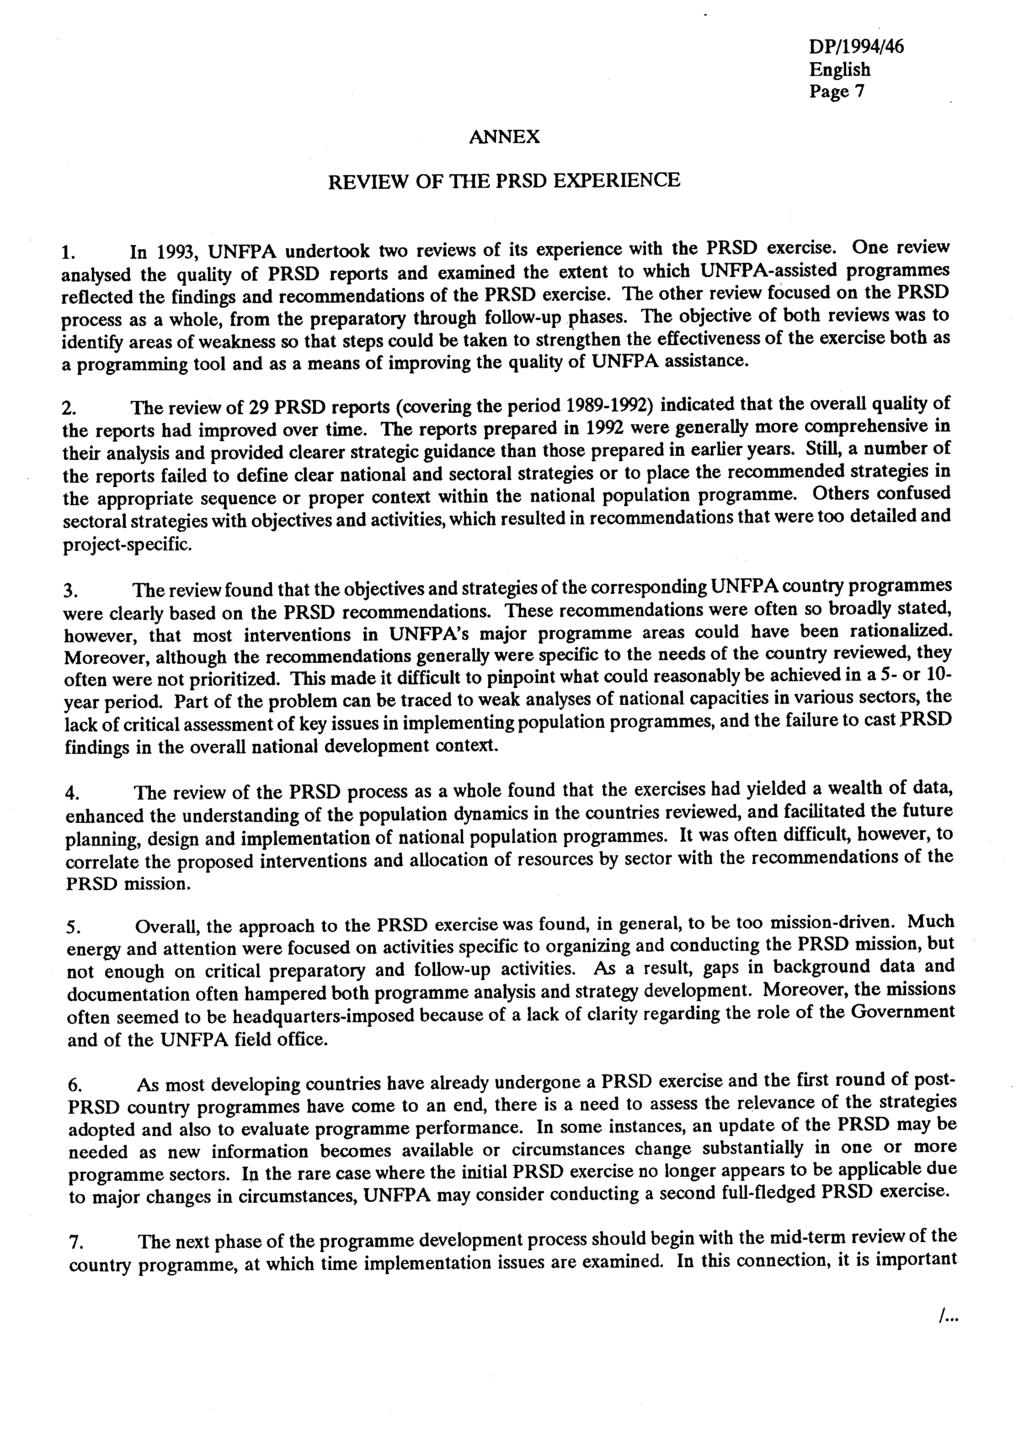 Page 7 ANNEX REVIEW OF THE PRSD EXPERIENCE 1. In 1993, UNFPA undertook two reviews of its experience with the PRSD exercise.